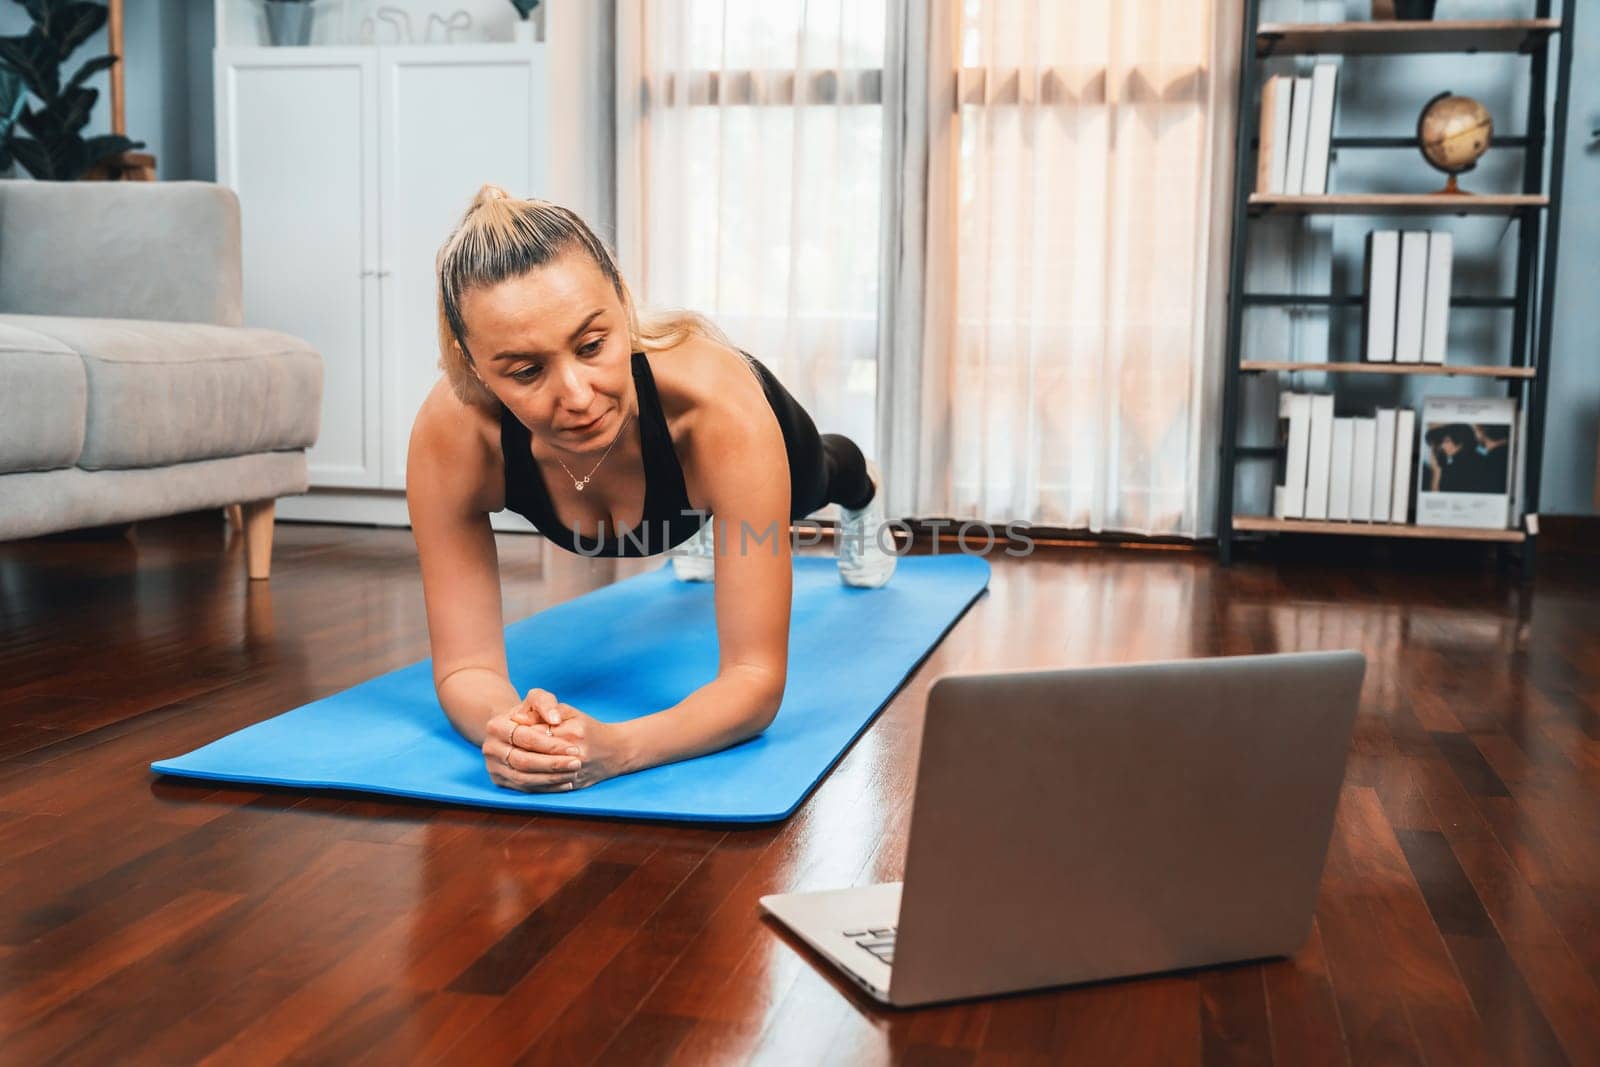 Athletic and sporty senior woman planking on fitness exercising mat while watching online fitness video at home exercise as concept of healthy fit body lifestyle after retirement. Clout